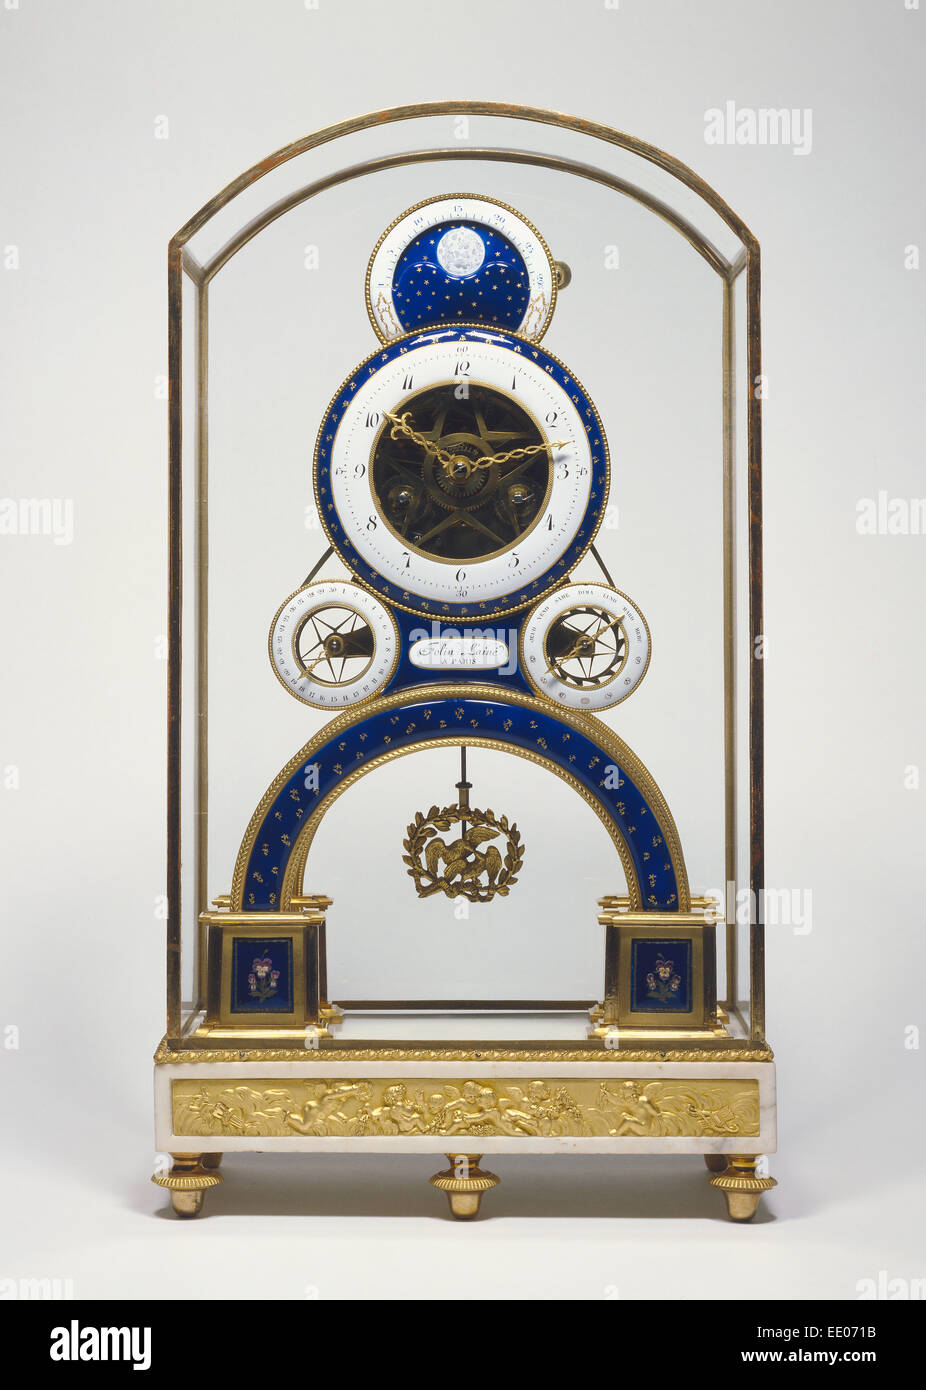 Mantel Clock; Movement by Nicolas-Alexandre Folin, French, about 1750 - after 1815, master 1789, and enamel plaques Stock Photo